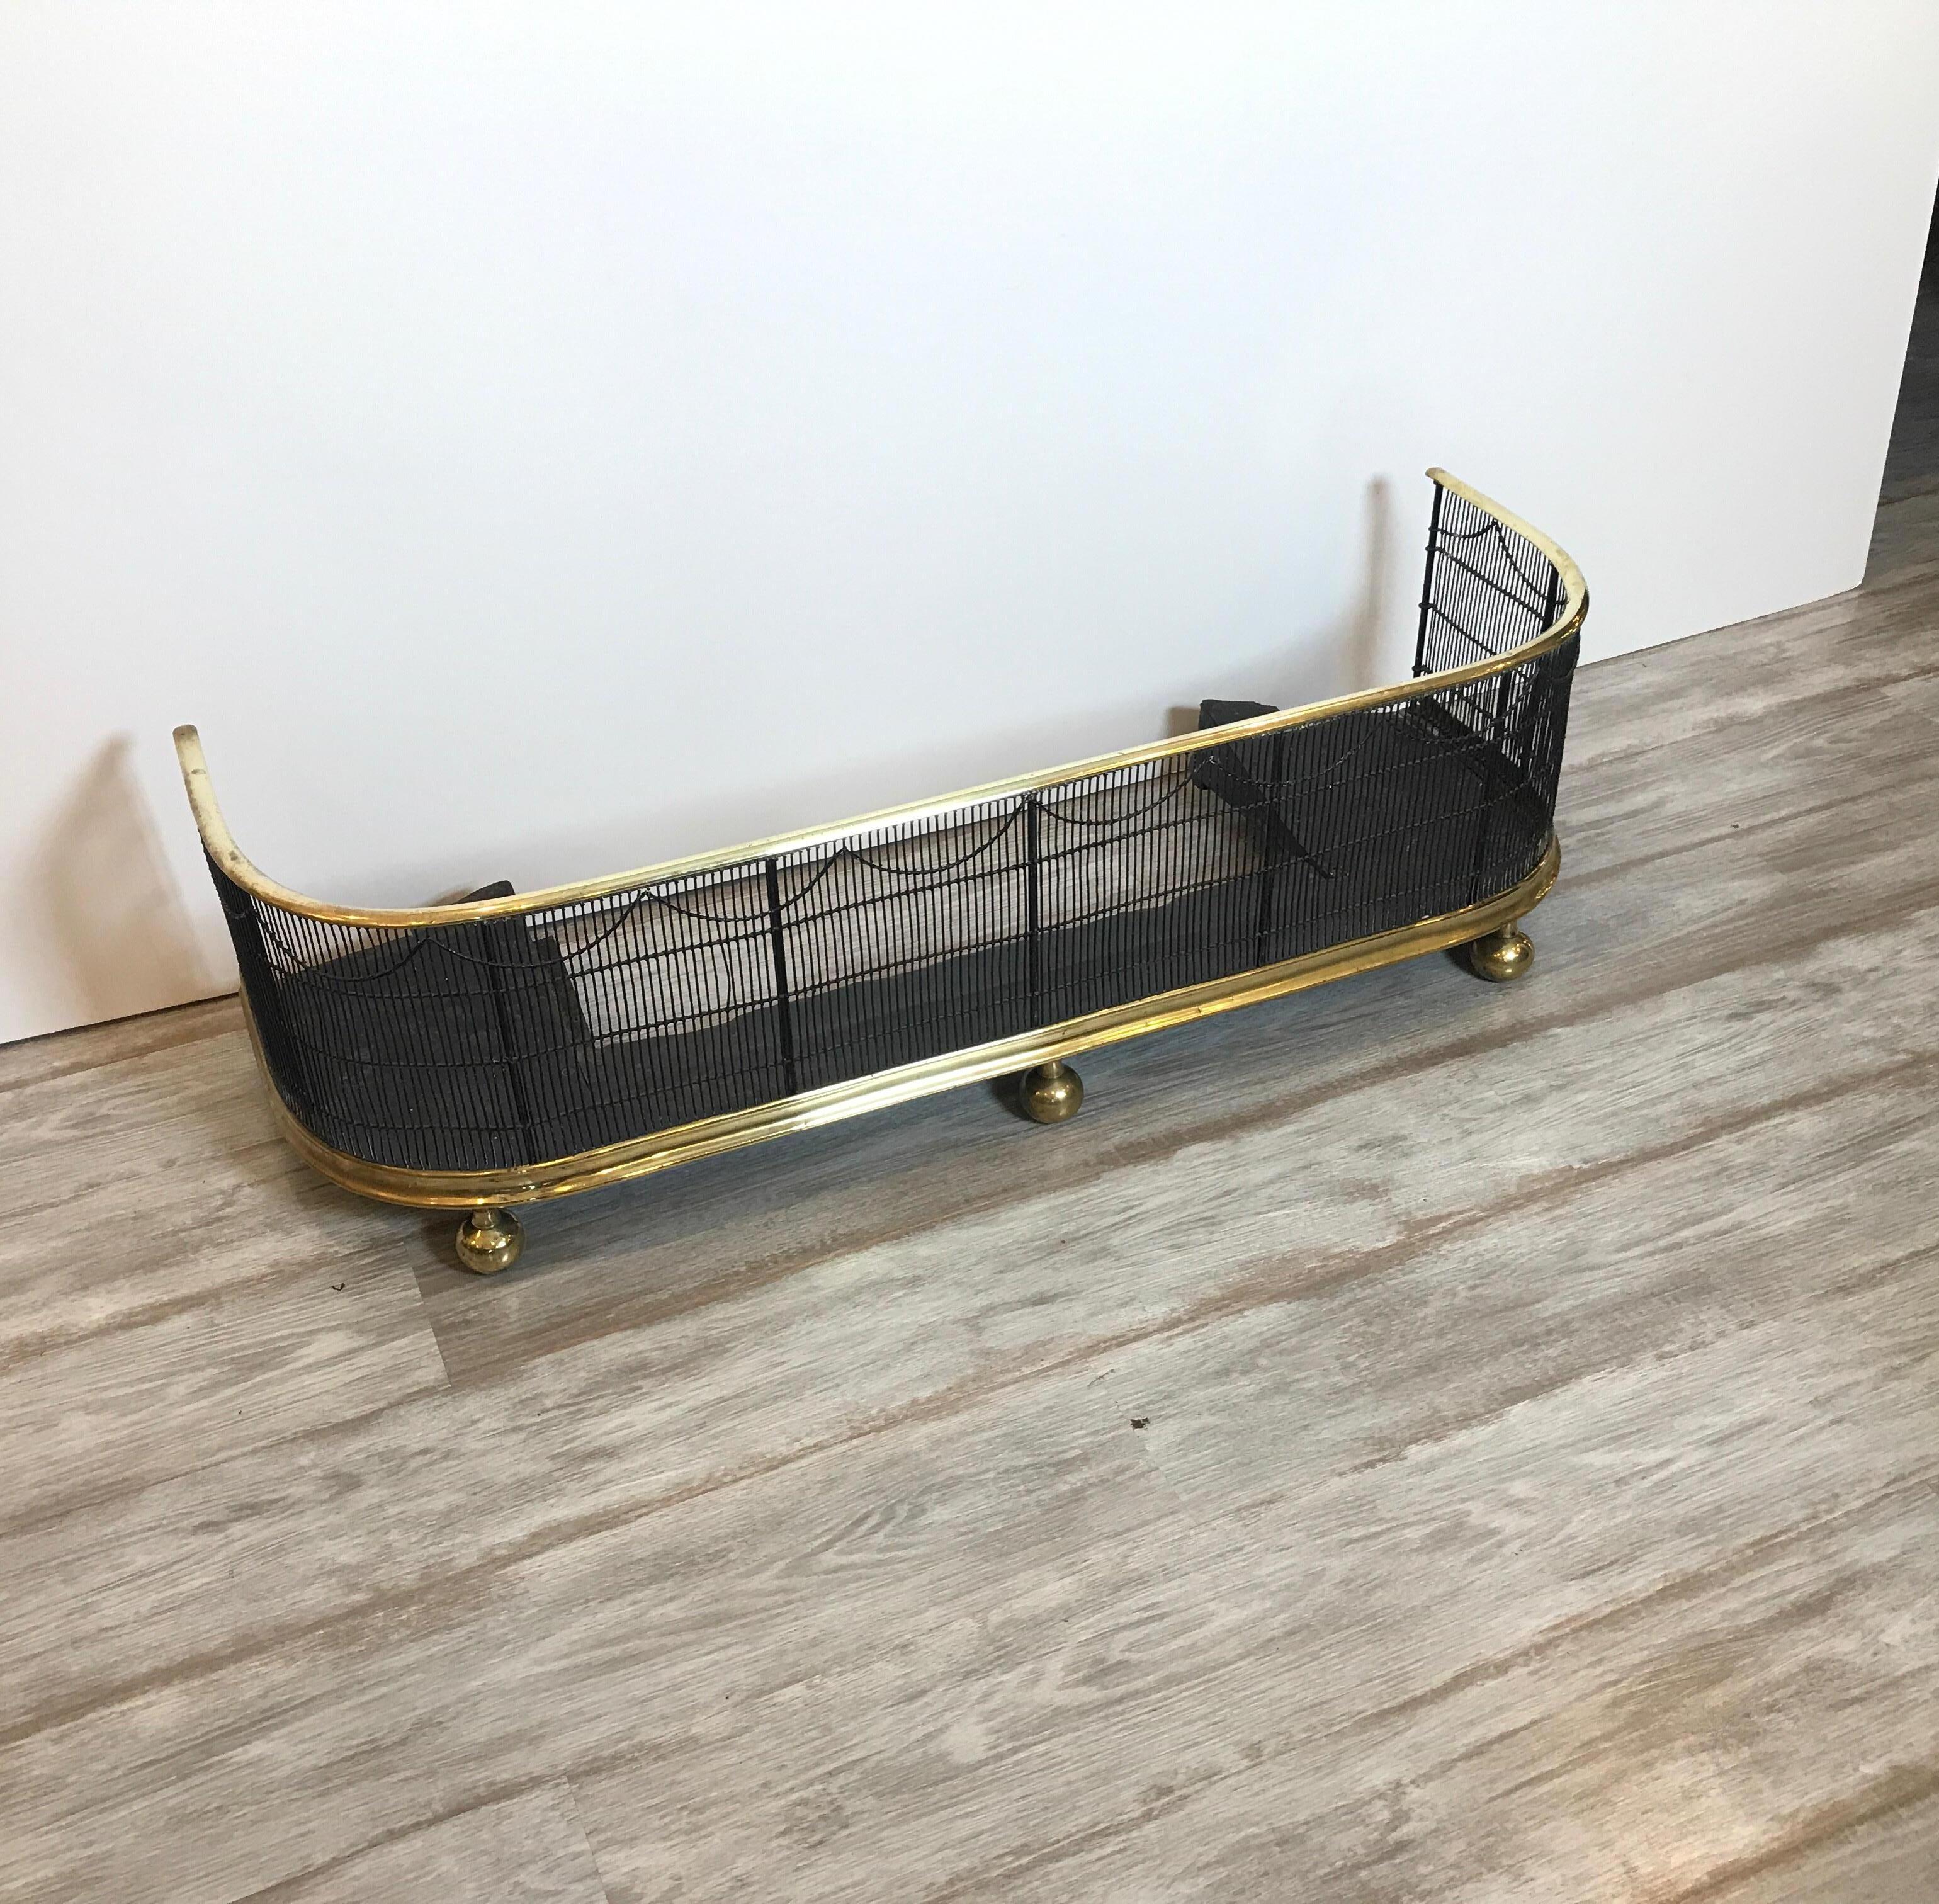 An early English Regency brass and wire fireplace fender. The fender with polished brass top rail and bottom rail with brass bun feet. The wife fender in its natural dark aged finish.